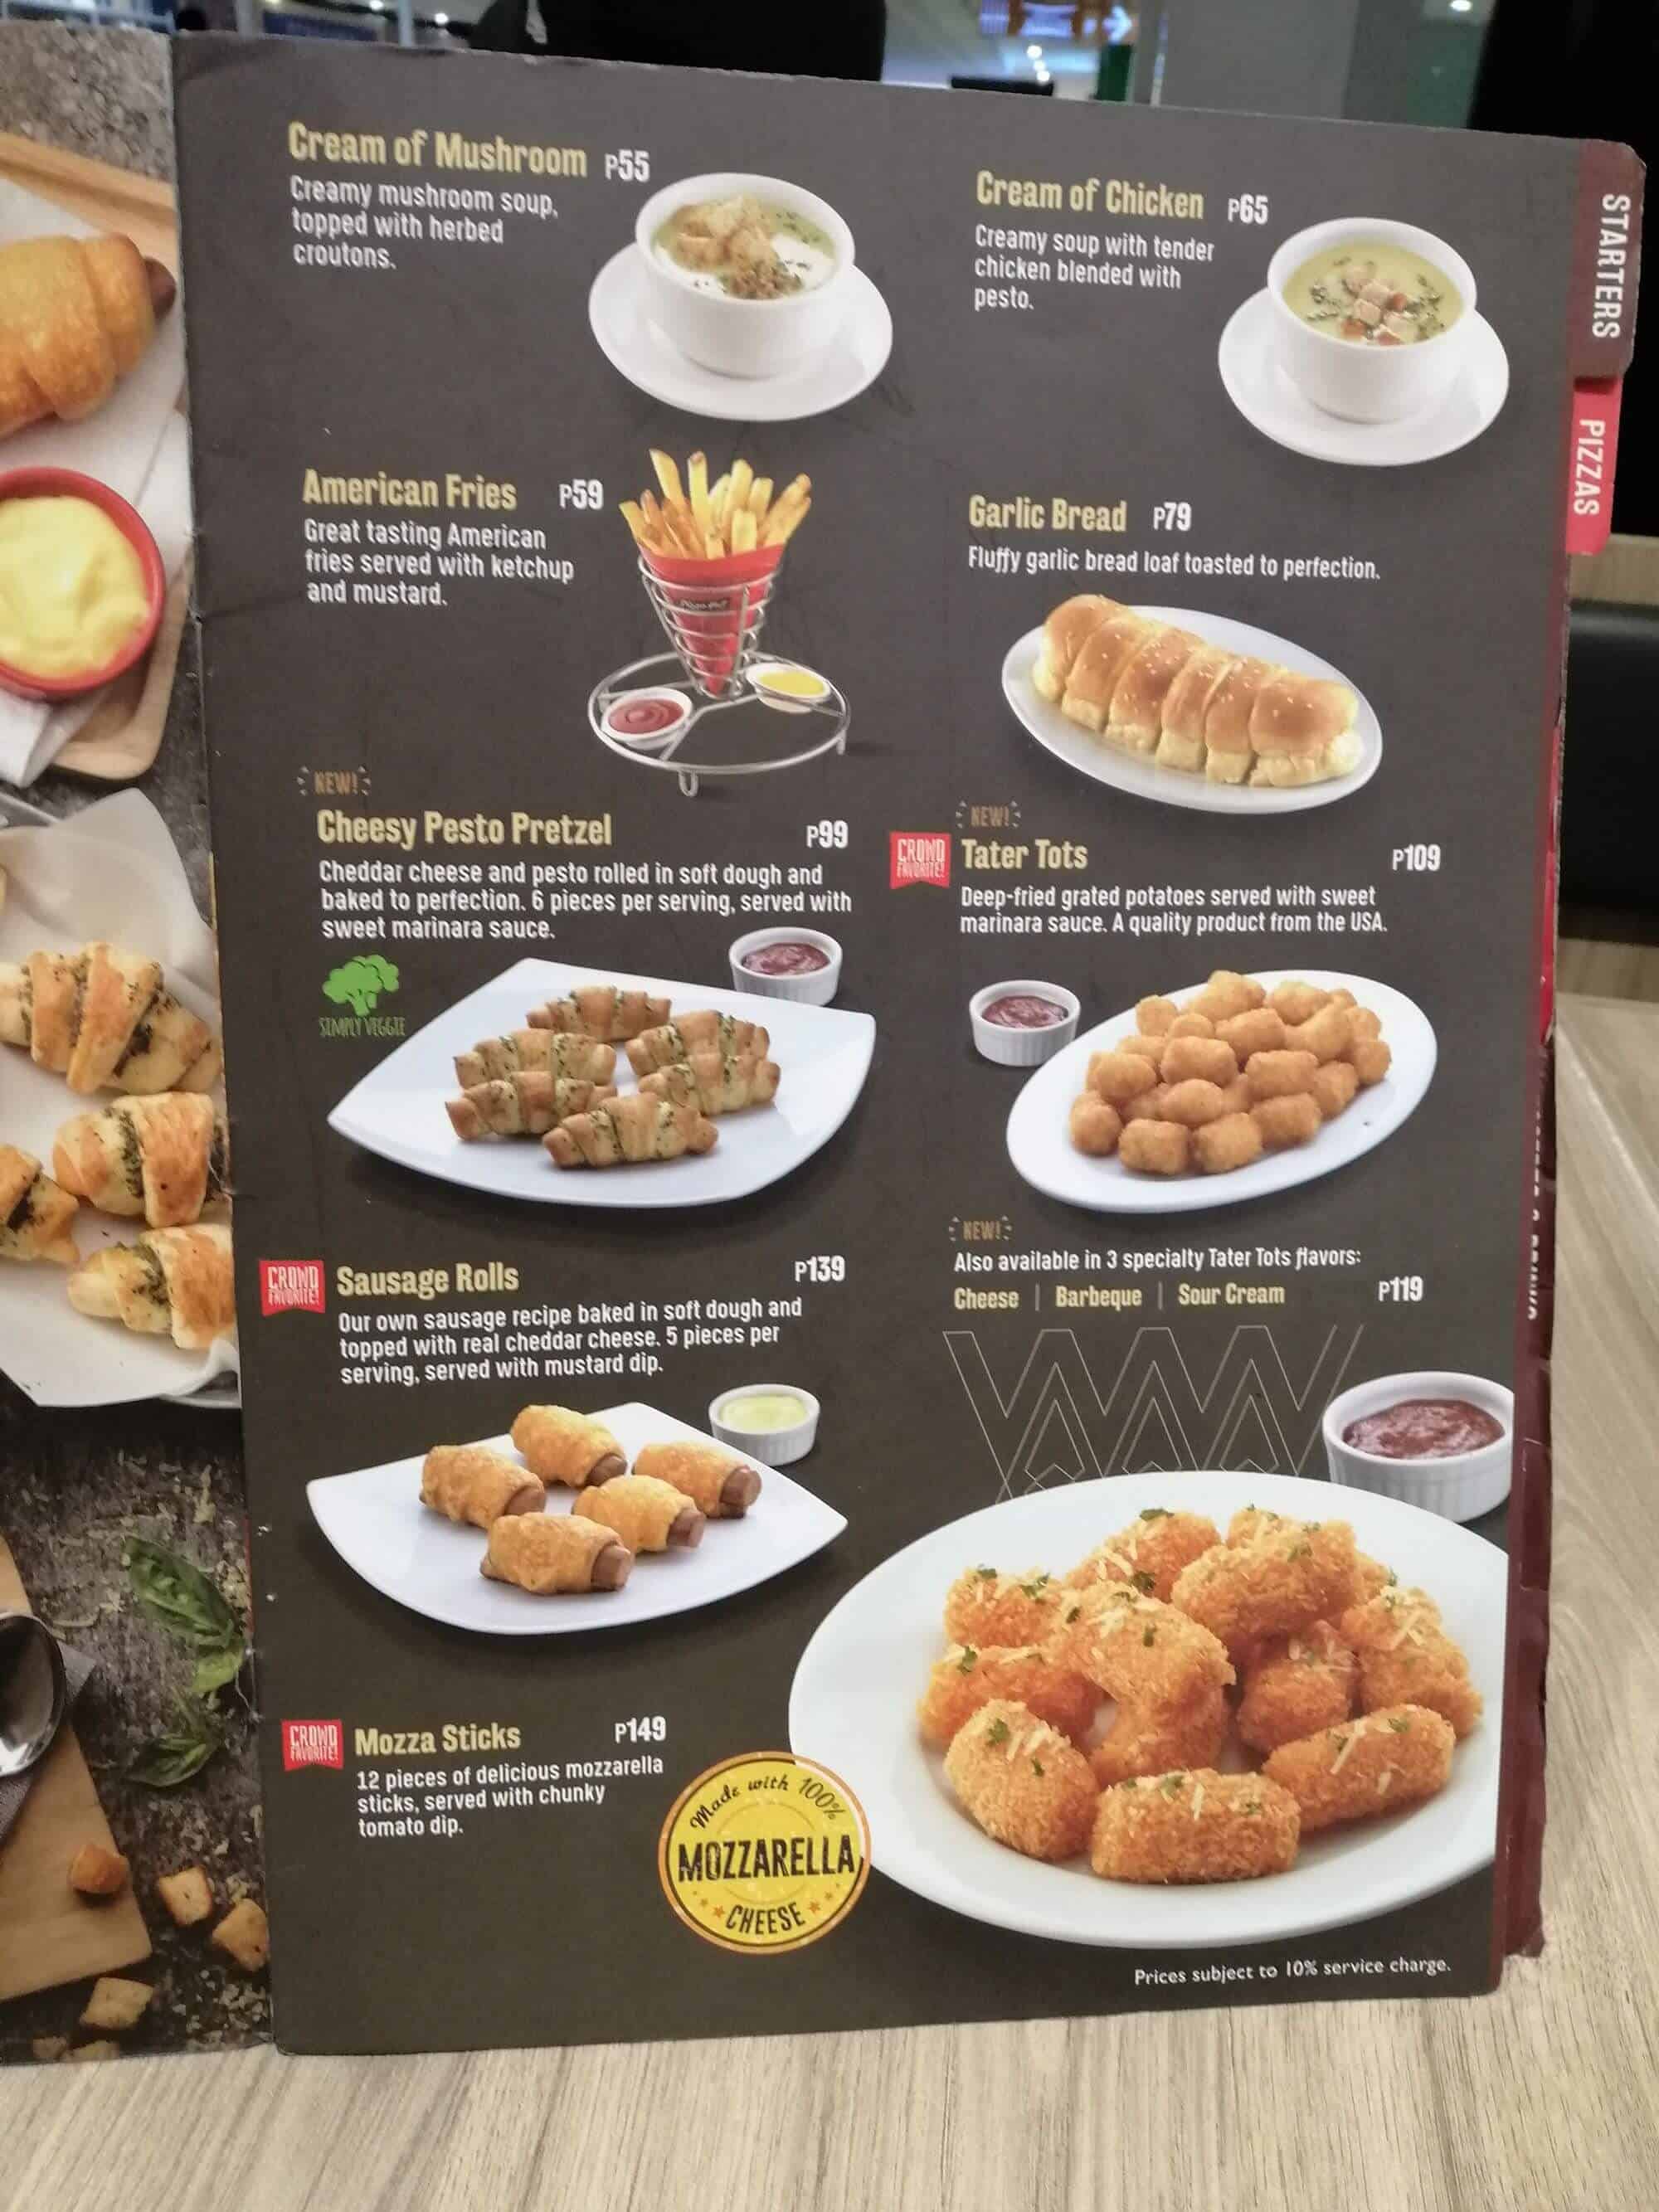 Garlic Bread, Fries, Soups, And Sausage Rolls At Pizza Hut Ph